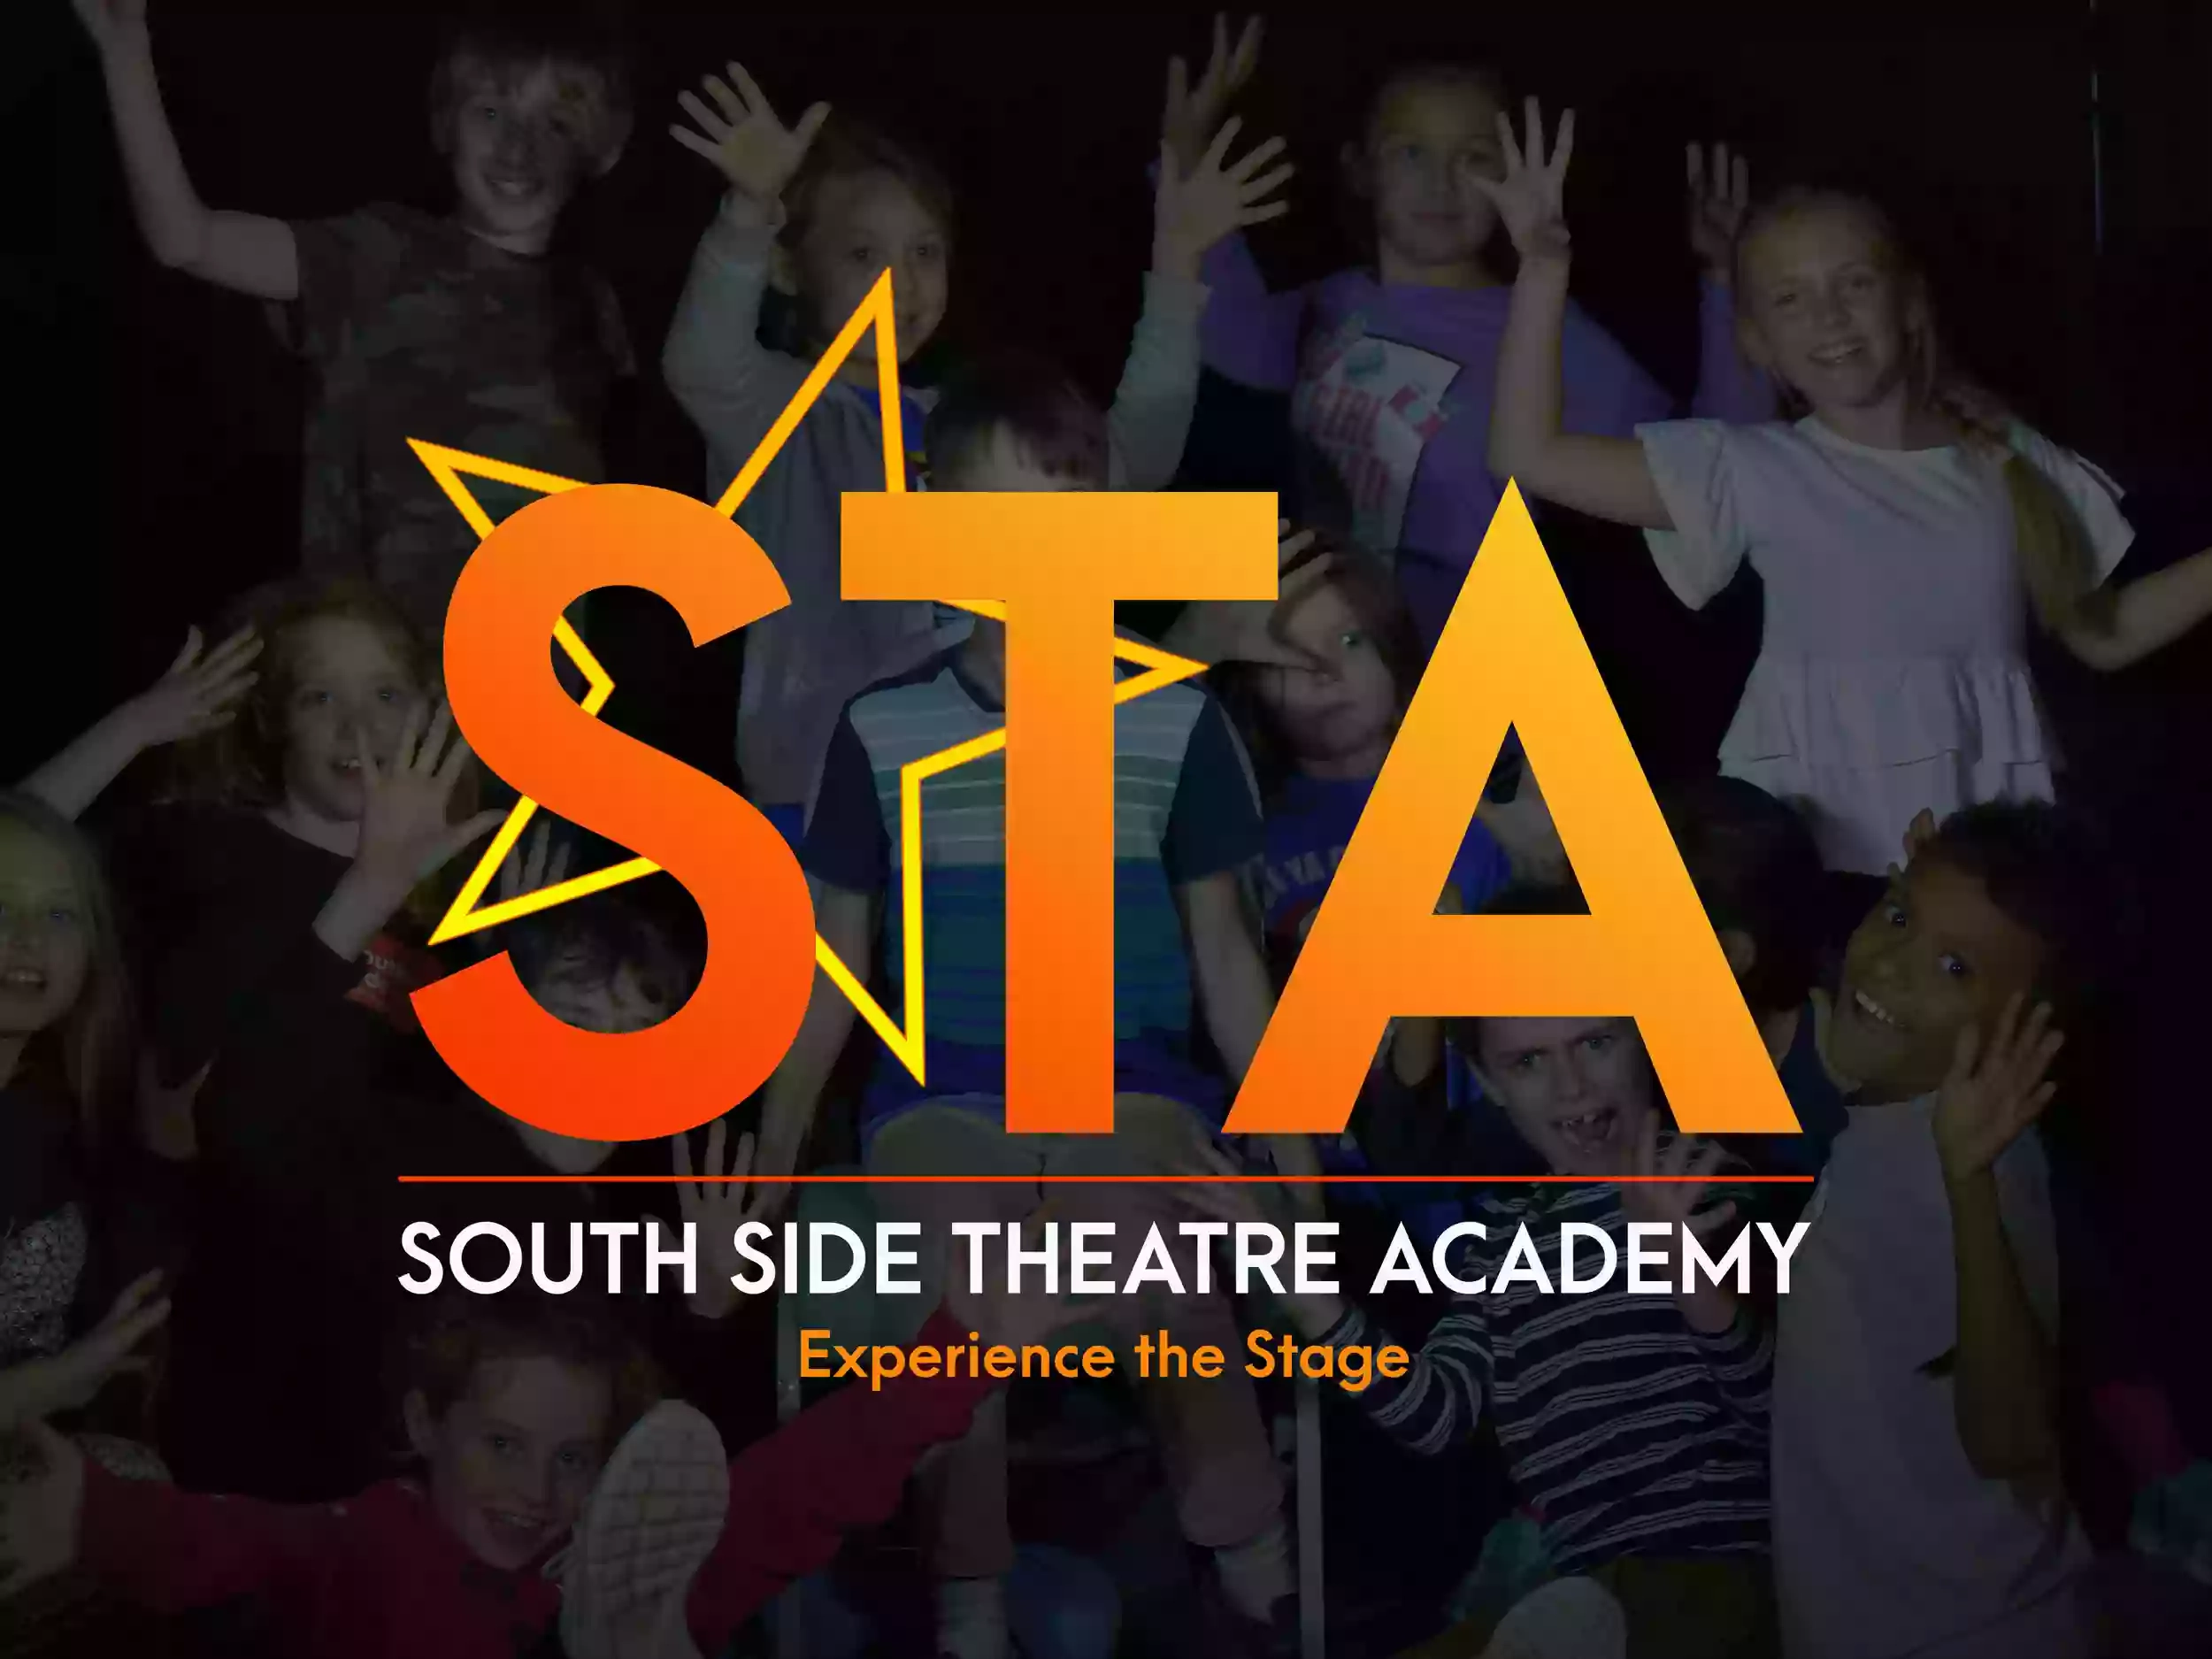 South Side Theatre Academy